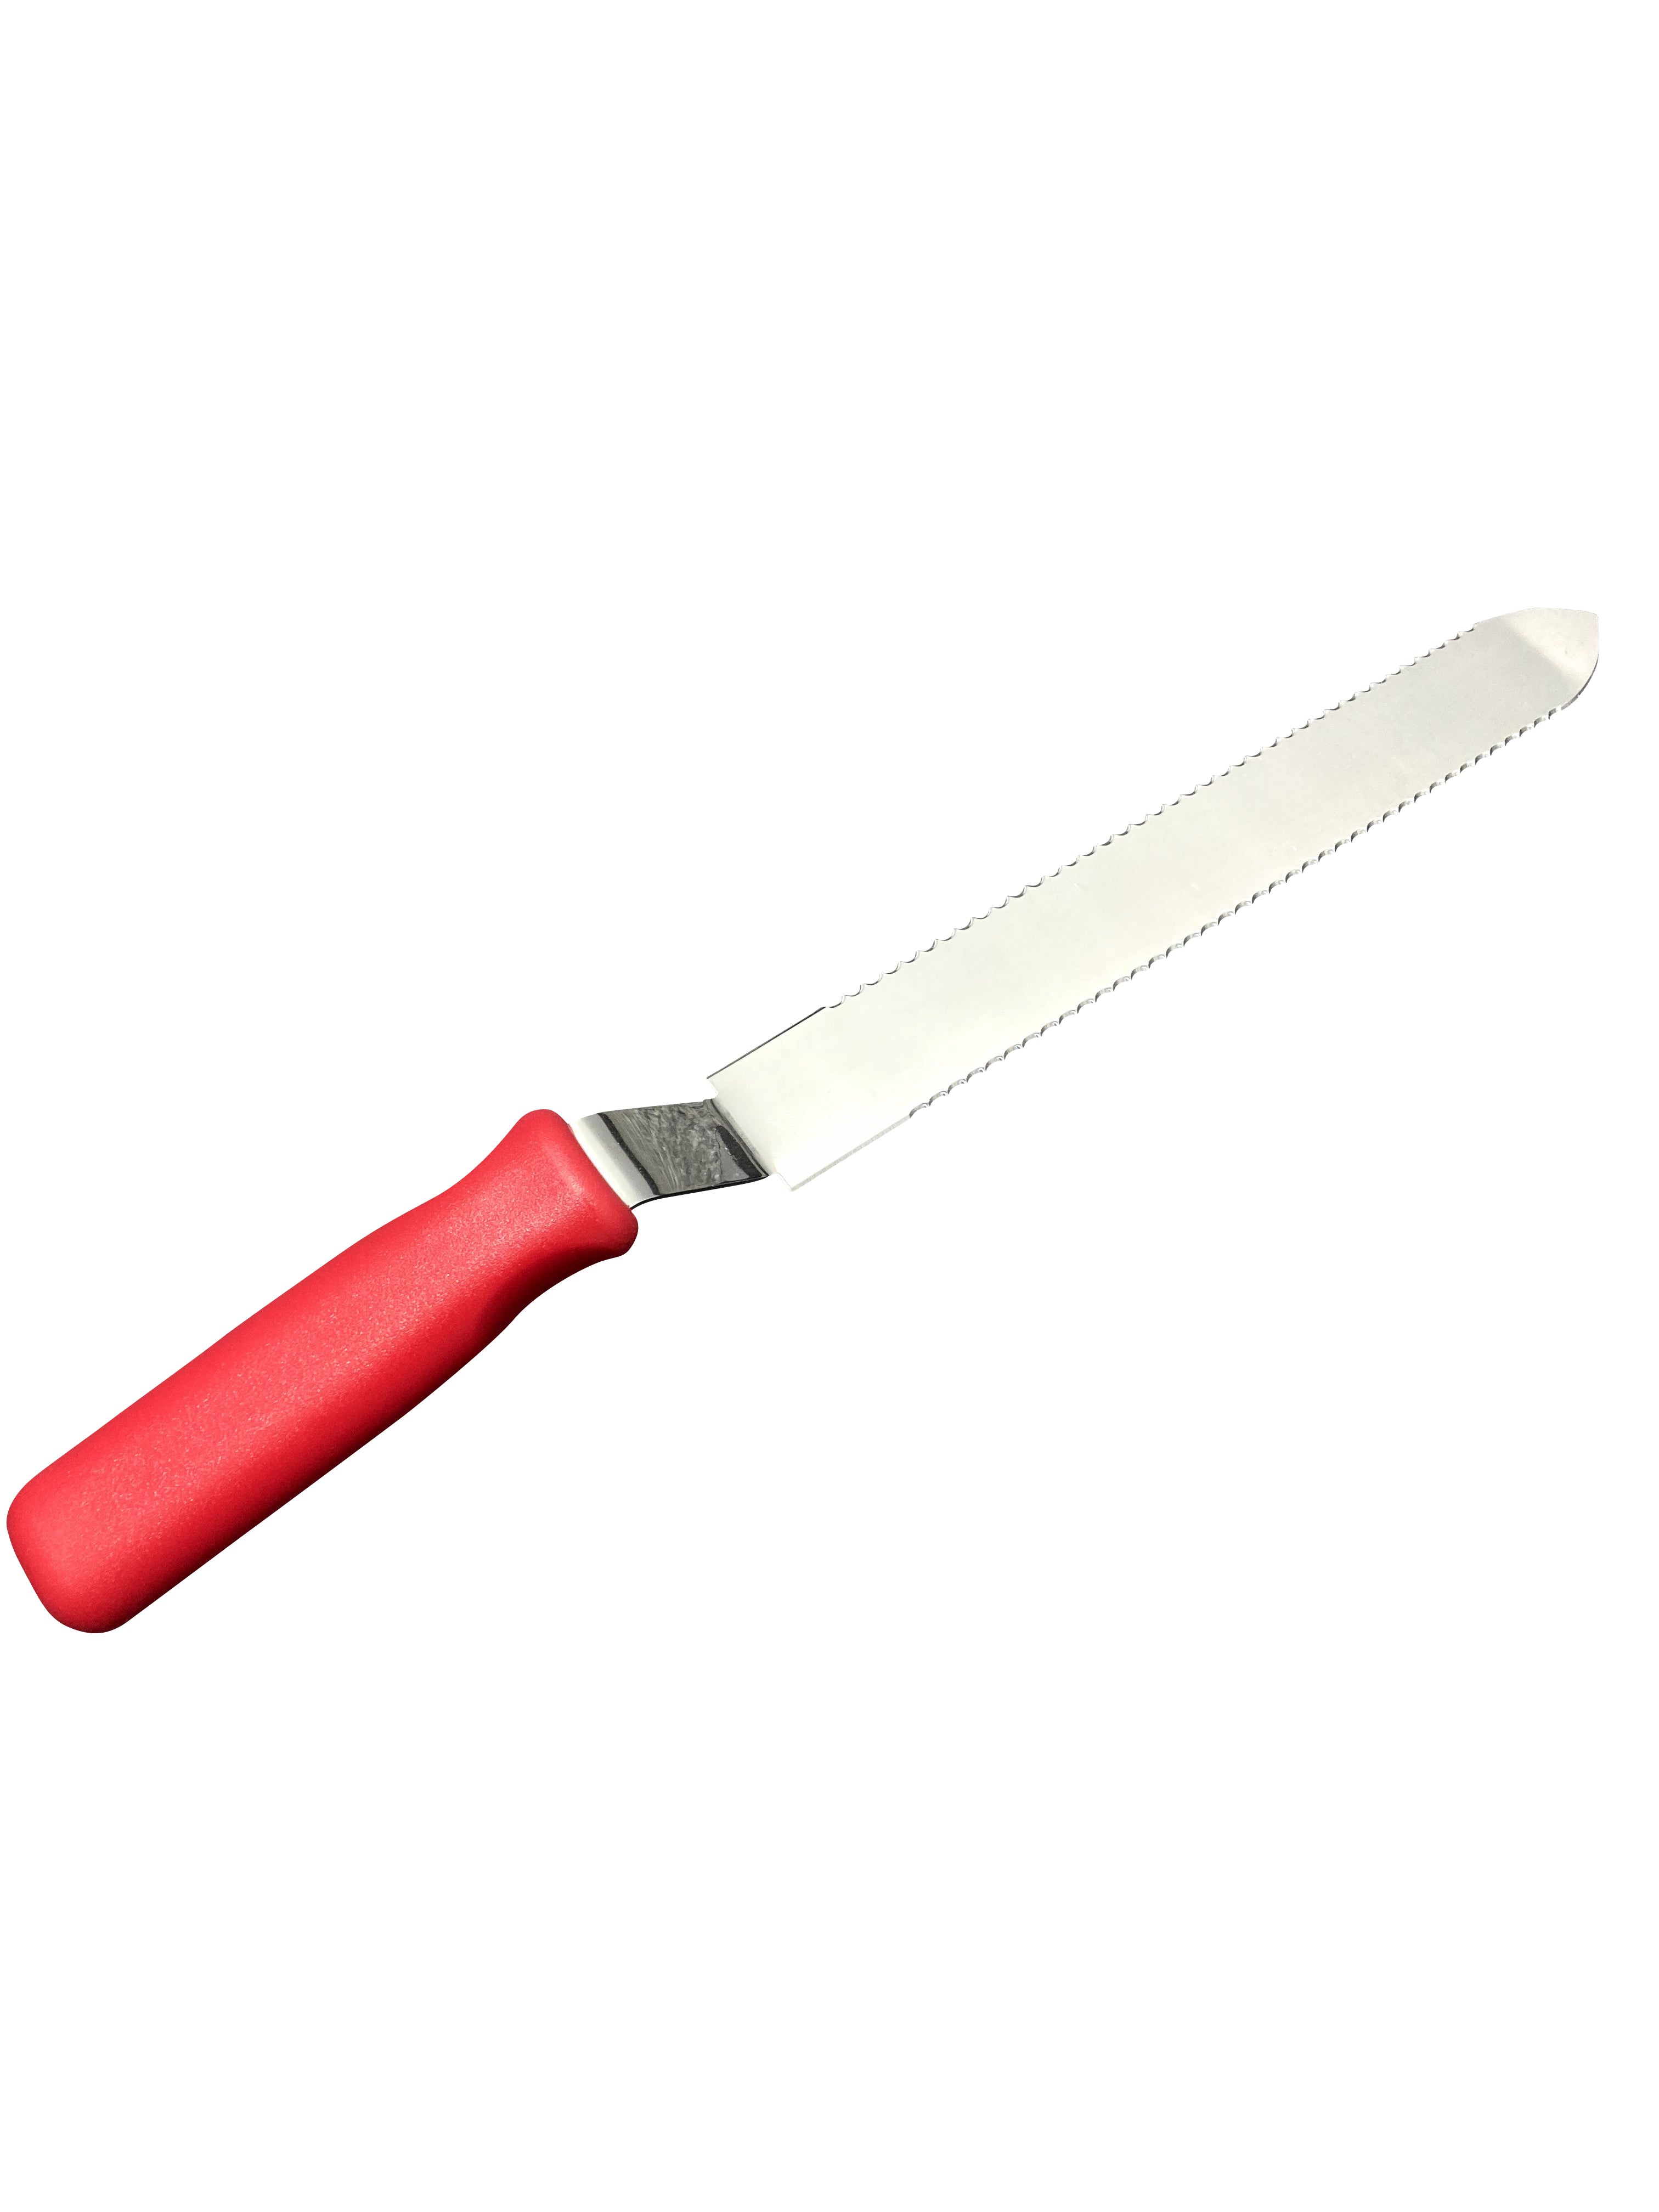 Serrated (Cold) Uncapping Knife